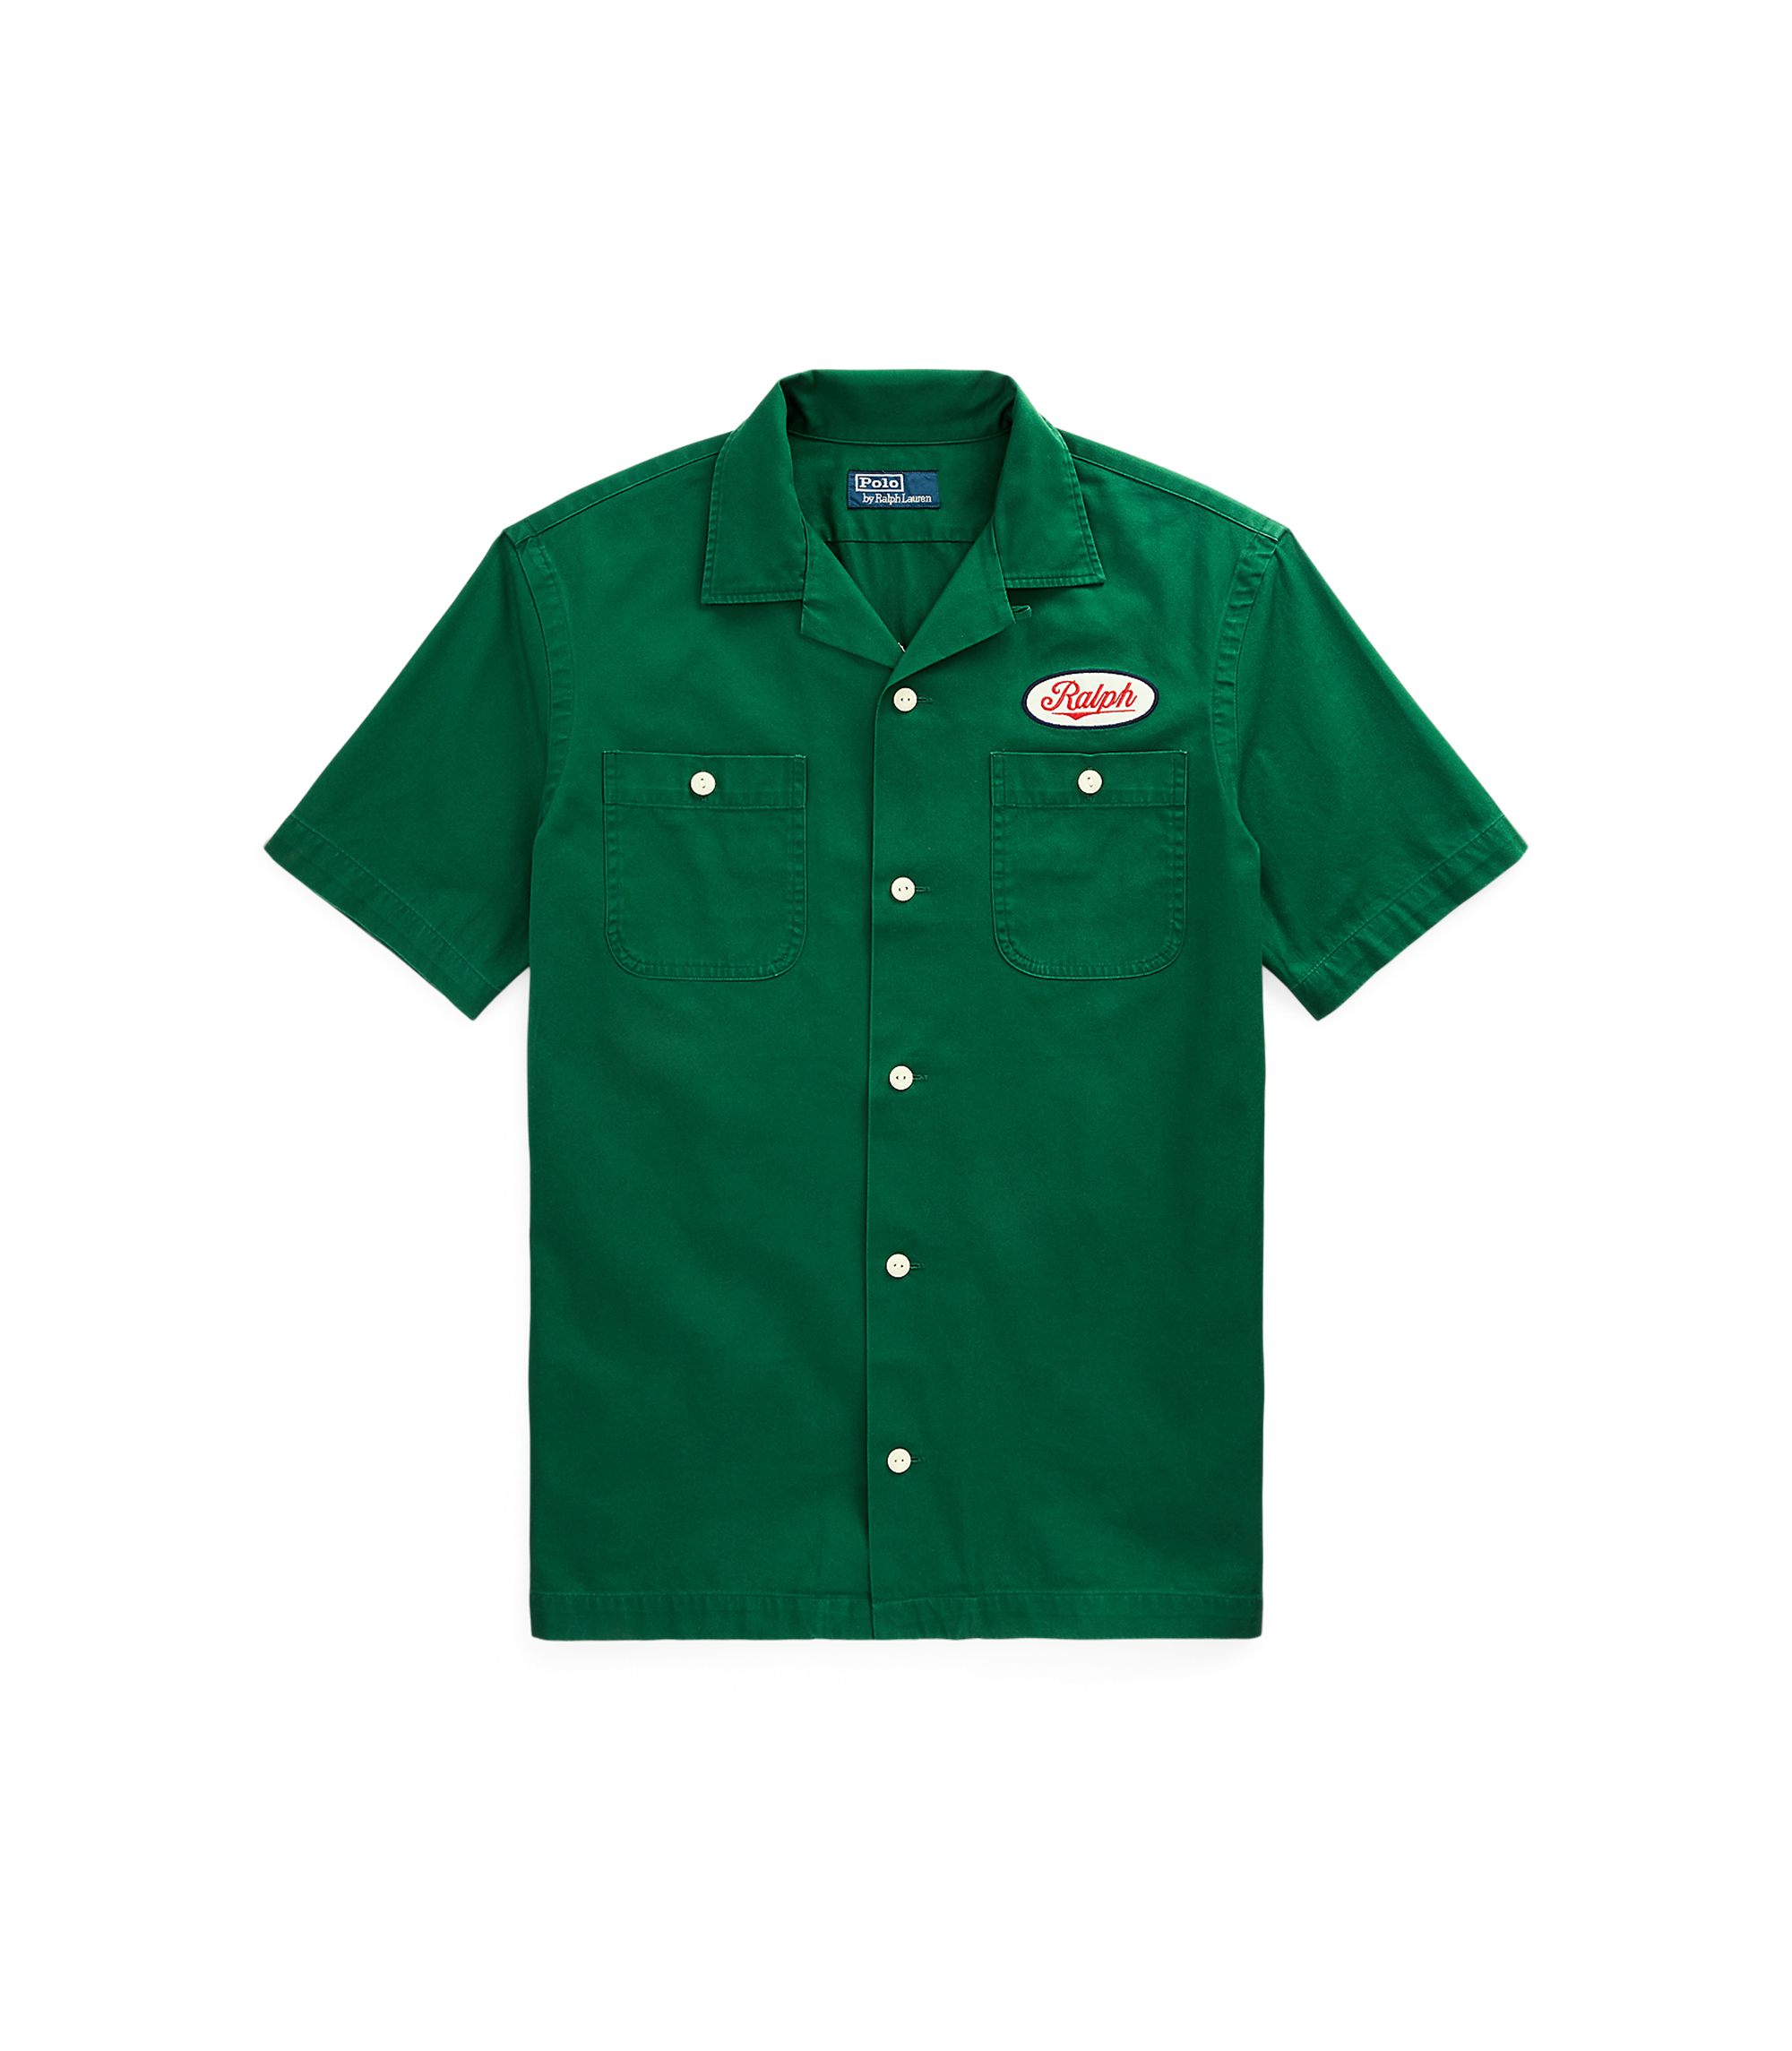 Workers Shirt - Green